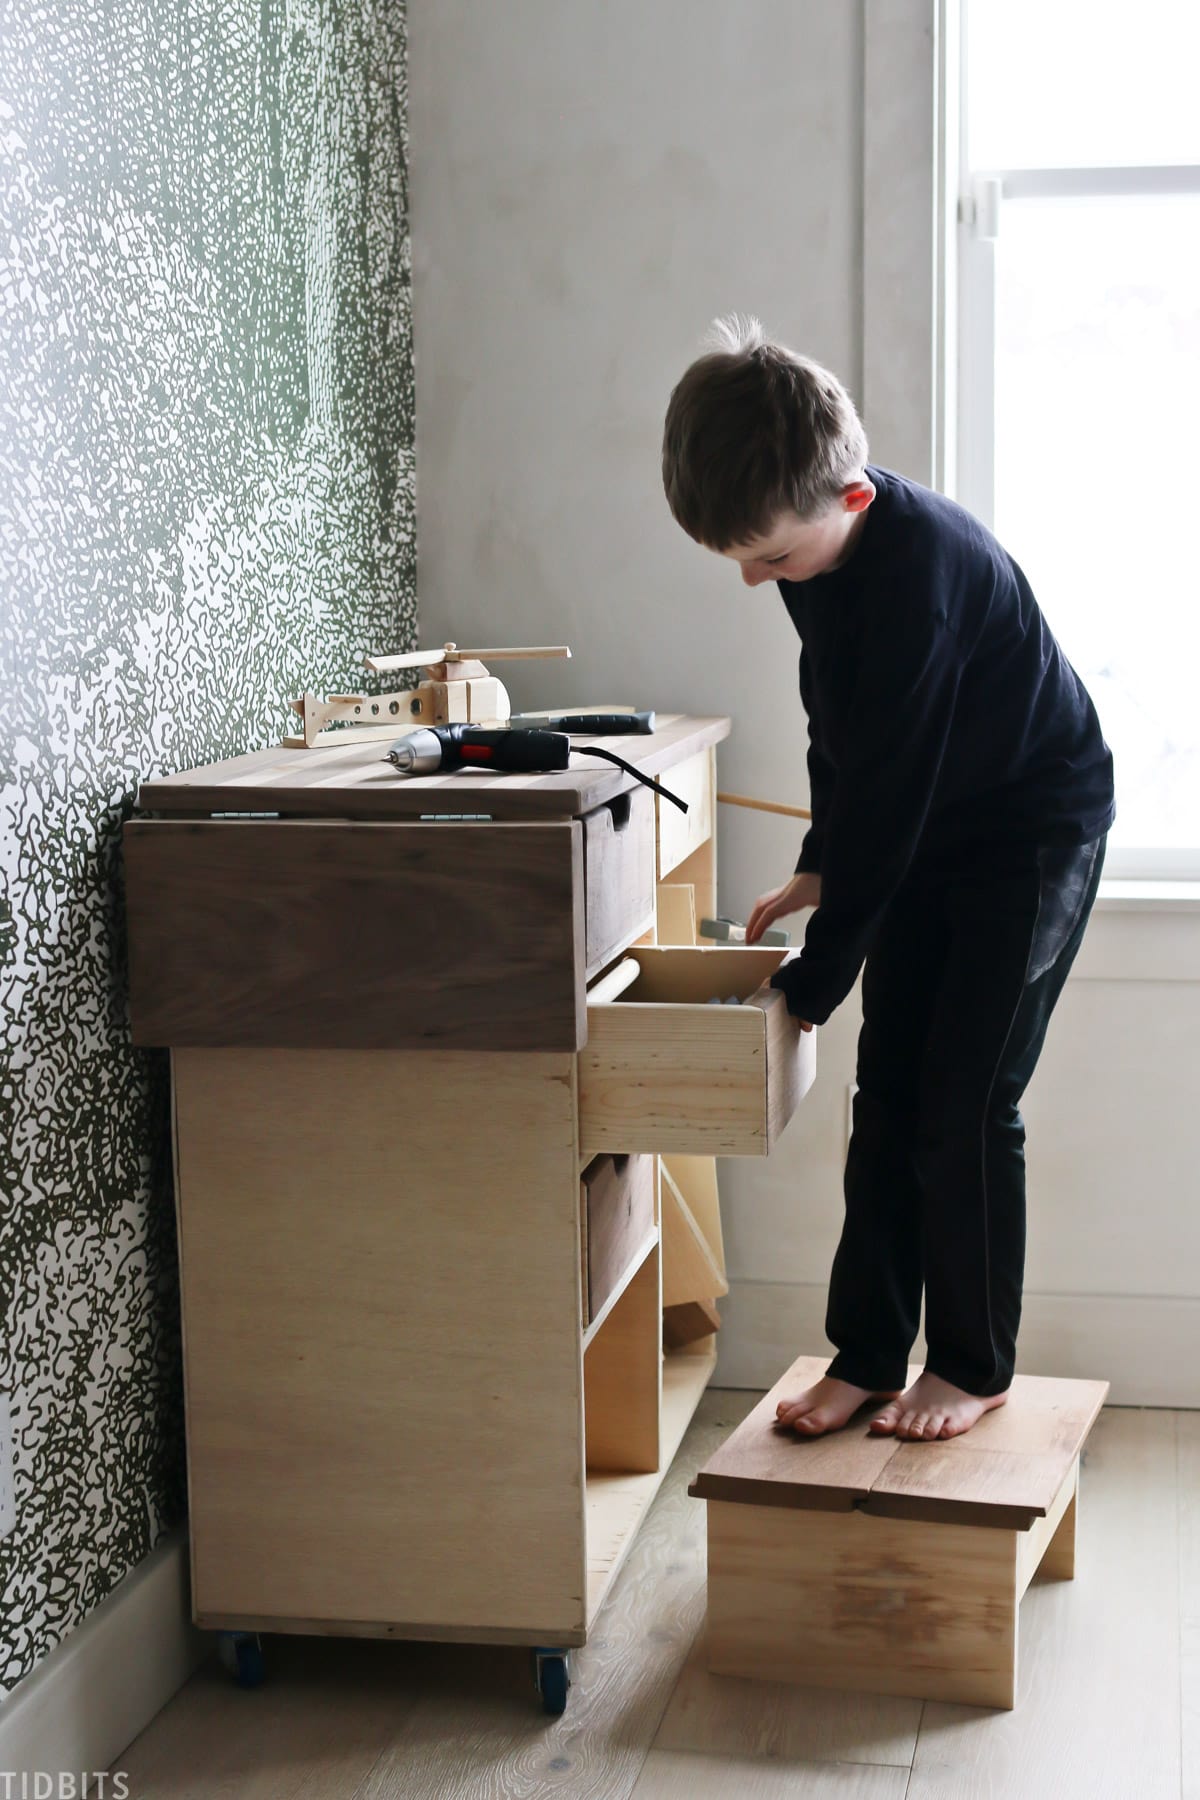 Little boy building on his own workbench